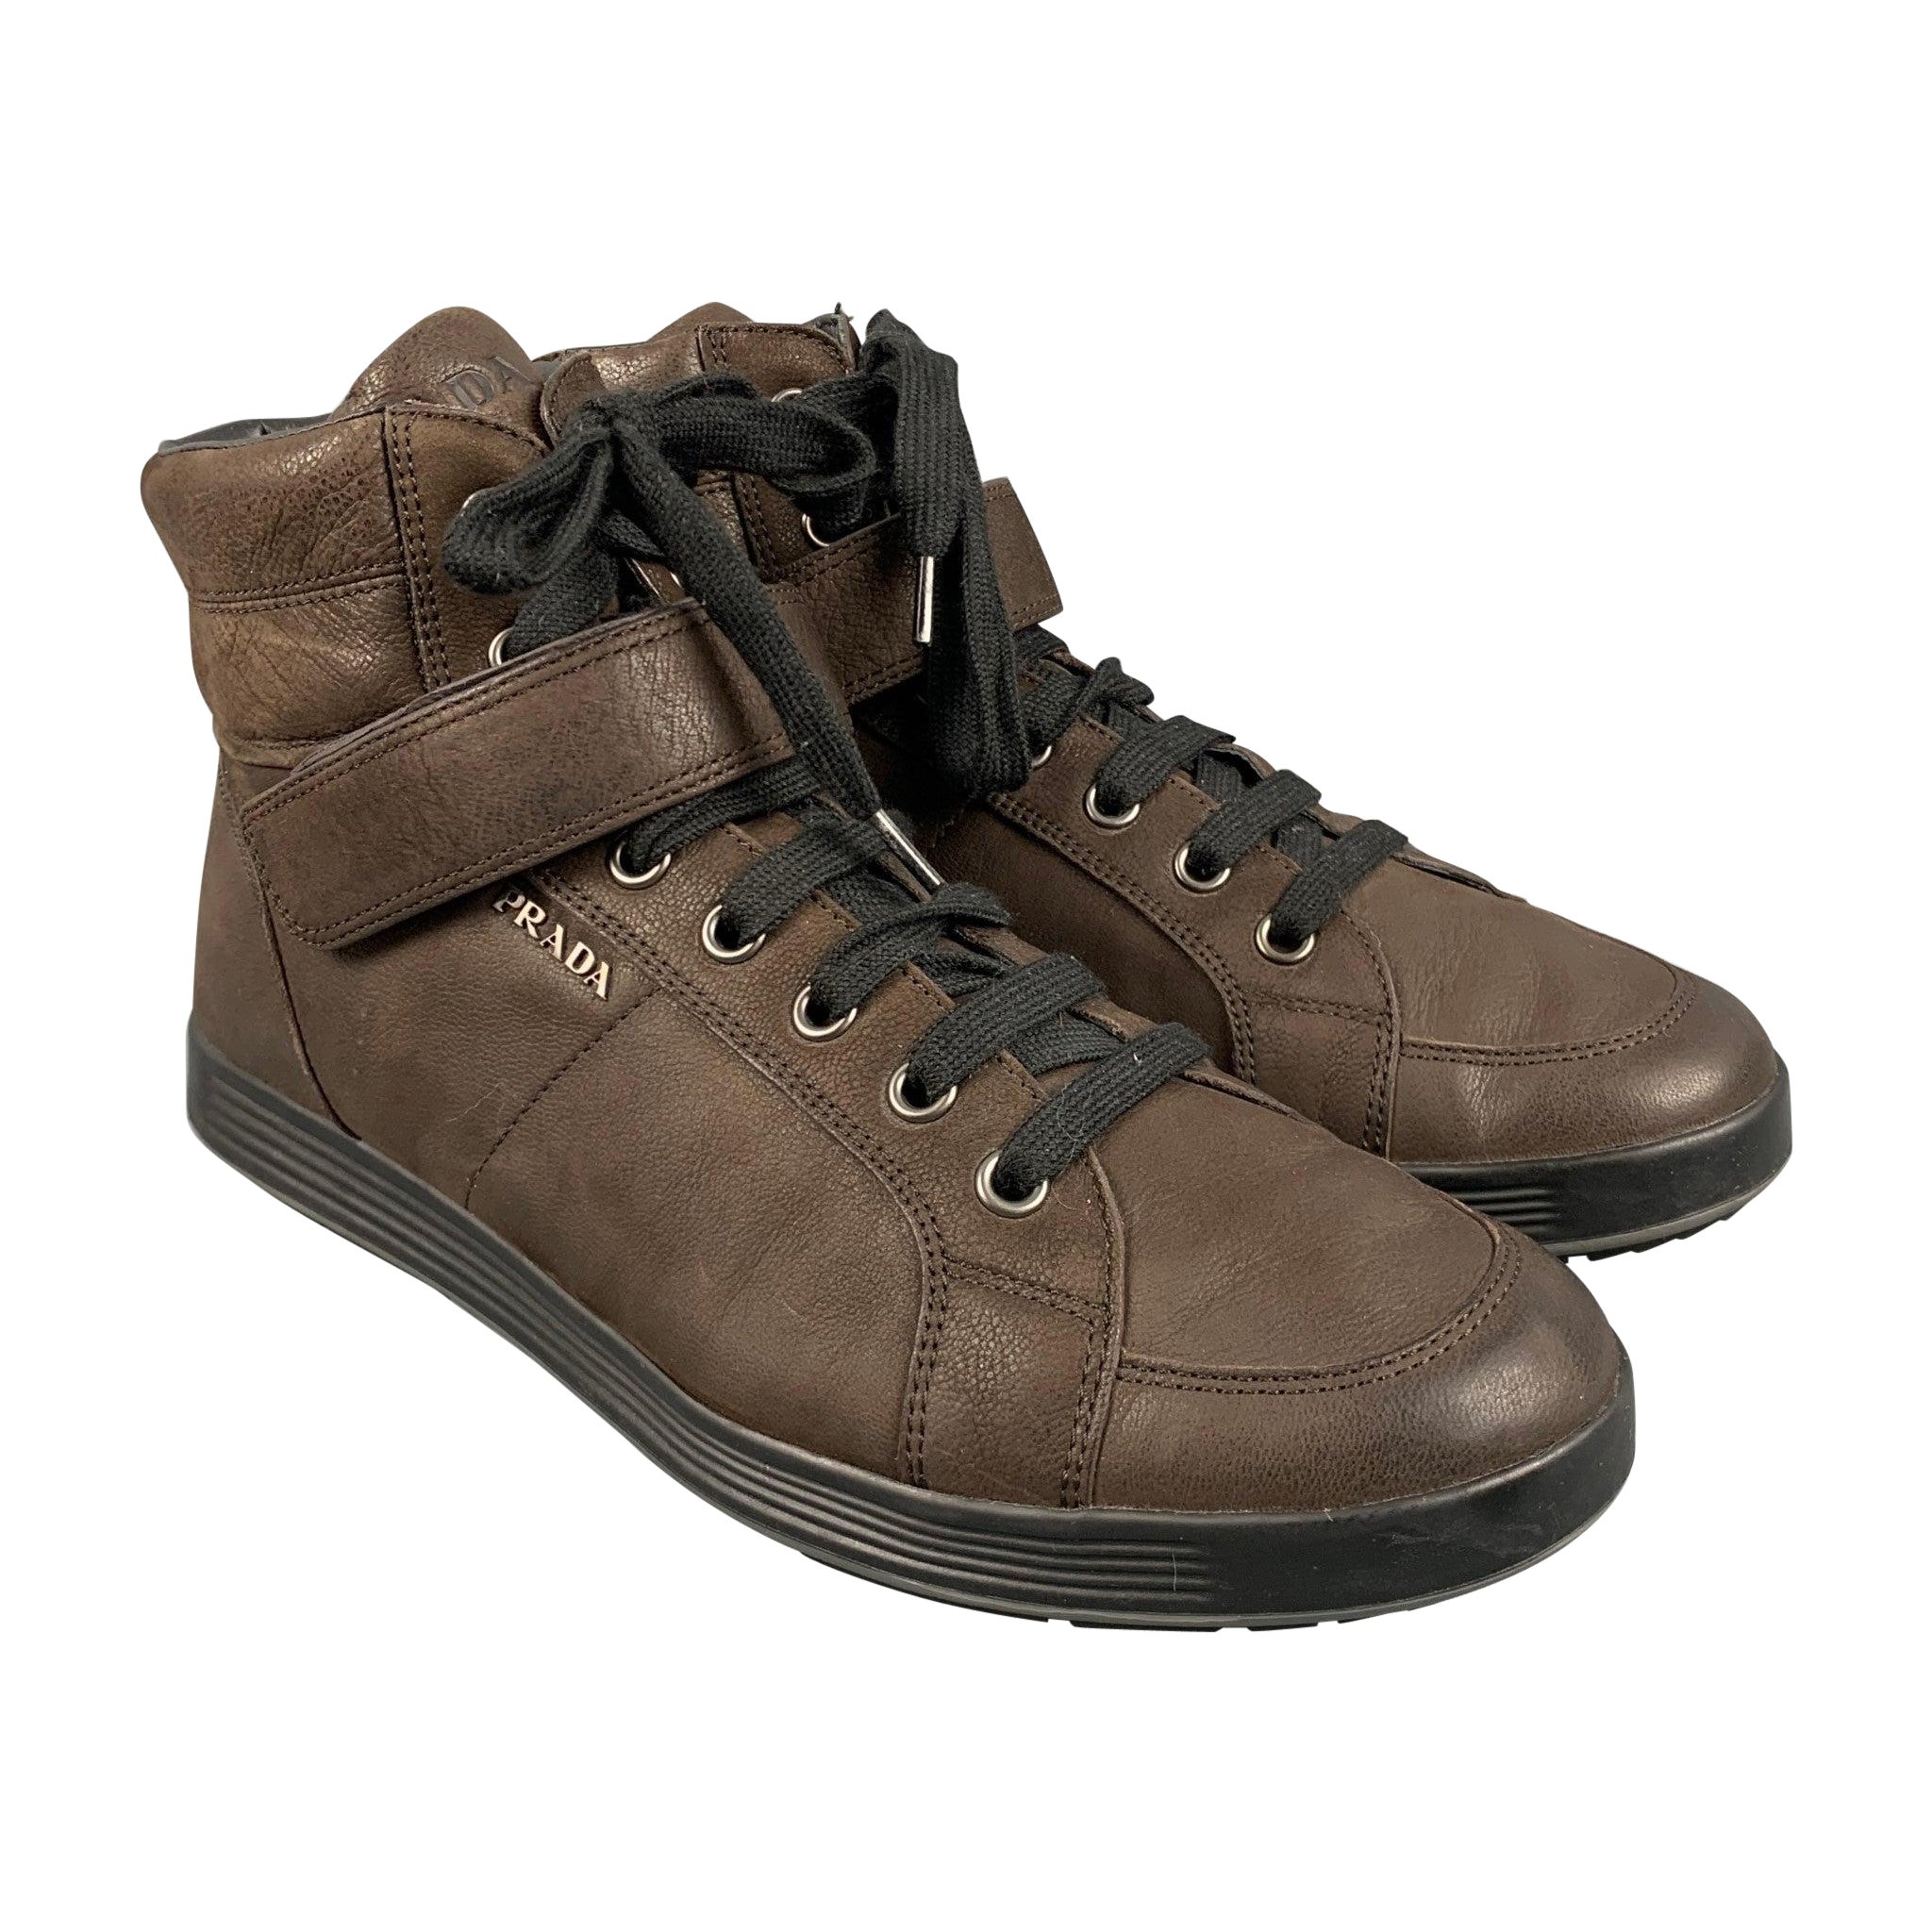 PRADA Size 11 Brown High Top Sneakers For Sale